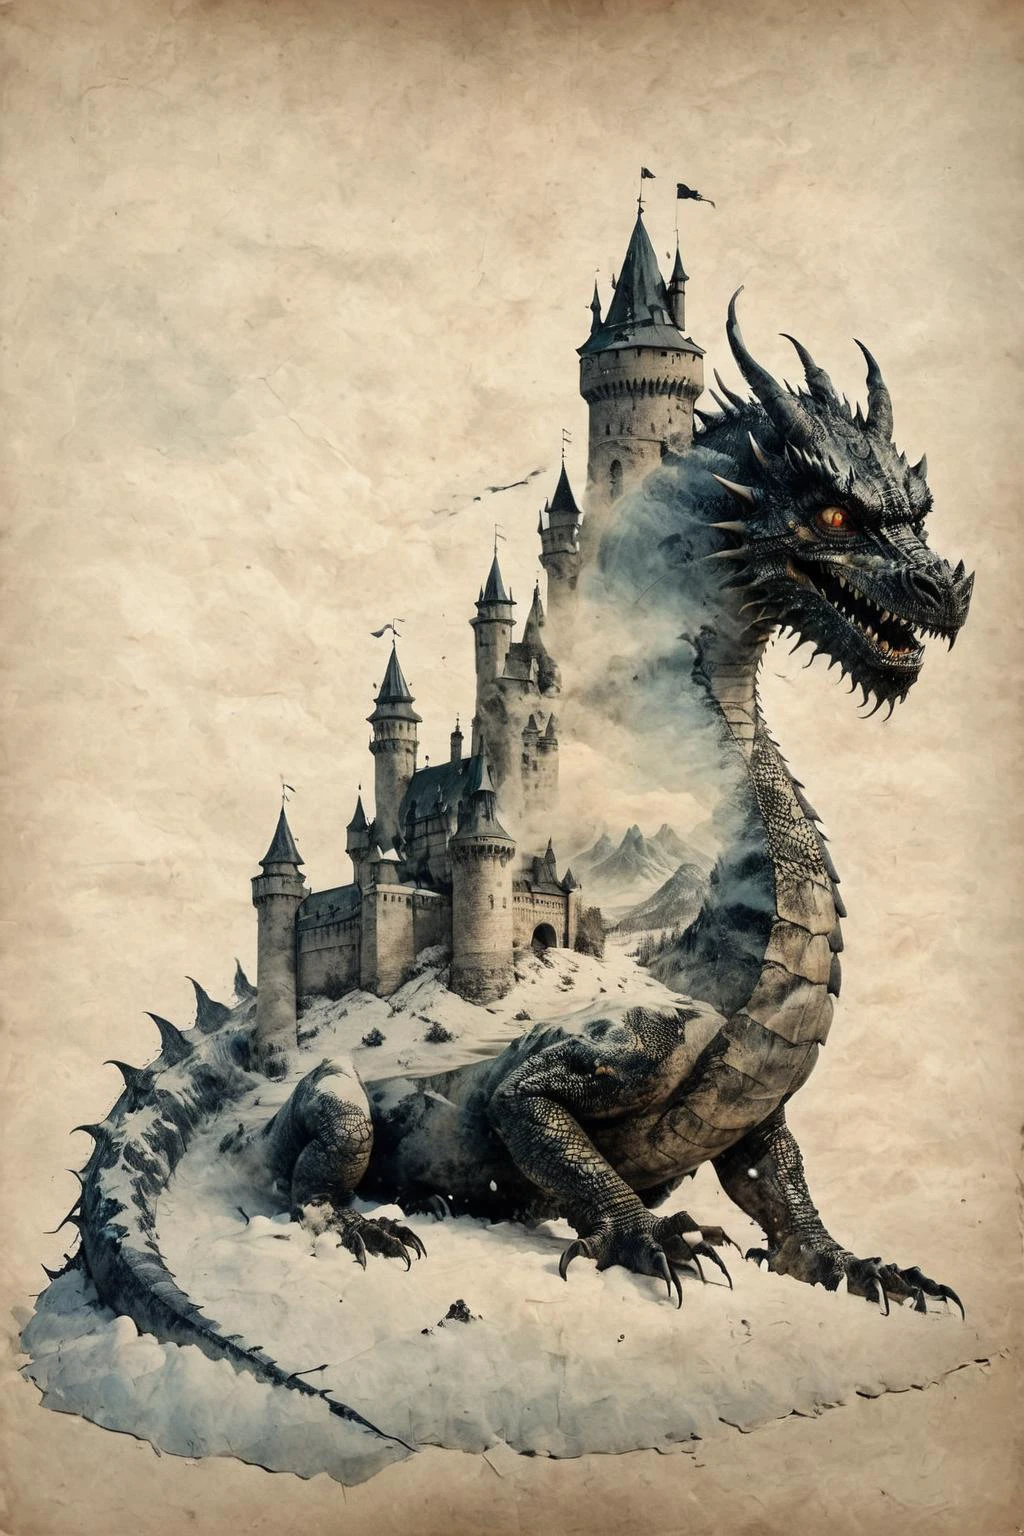 Double exposure,an old castle in the shadow of an evil dragon,(snow:1.4),by Christoffer Relander,double exposure,ON PARCHMENT,INK ON PARCHMENT,